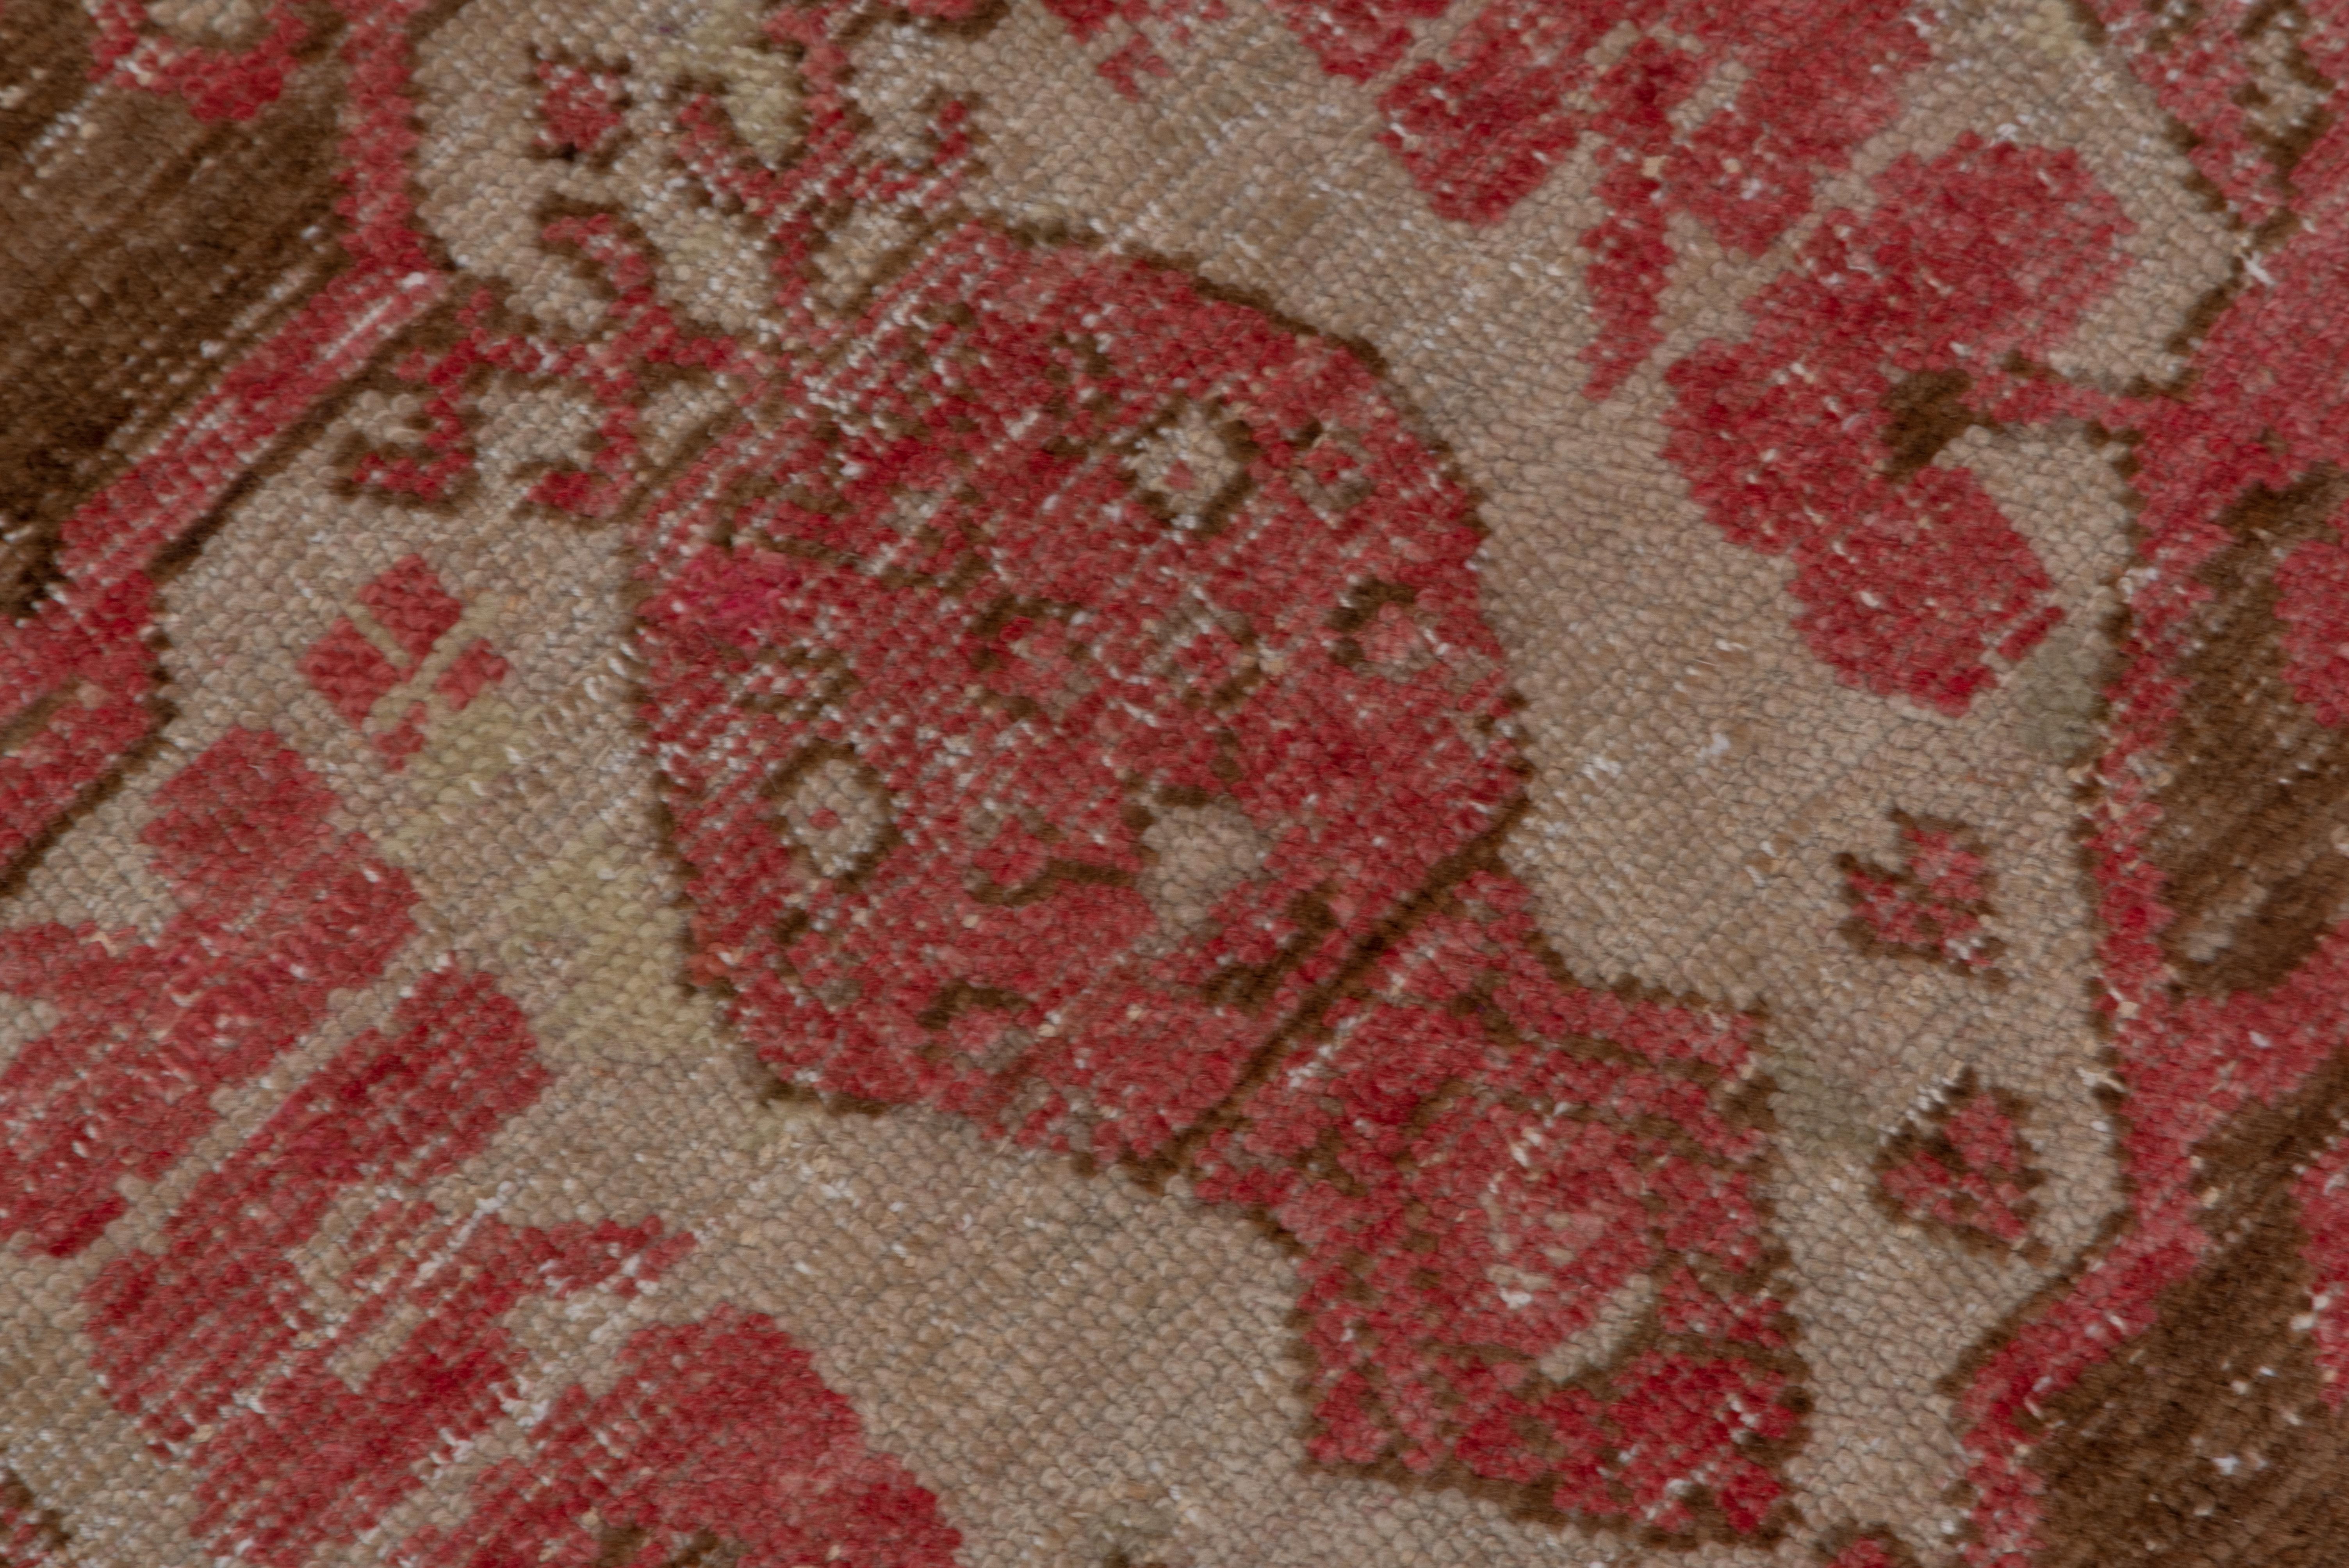 Antique Pink Turkish Kula Long Rug, circa 1930s, Pink and Brown Field In Good Condition For Sale In New York, NY